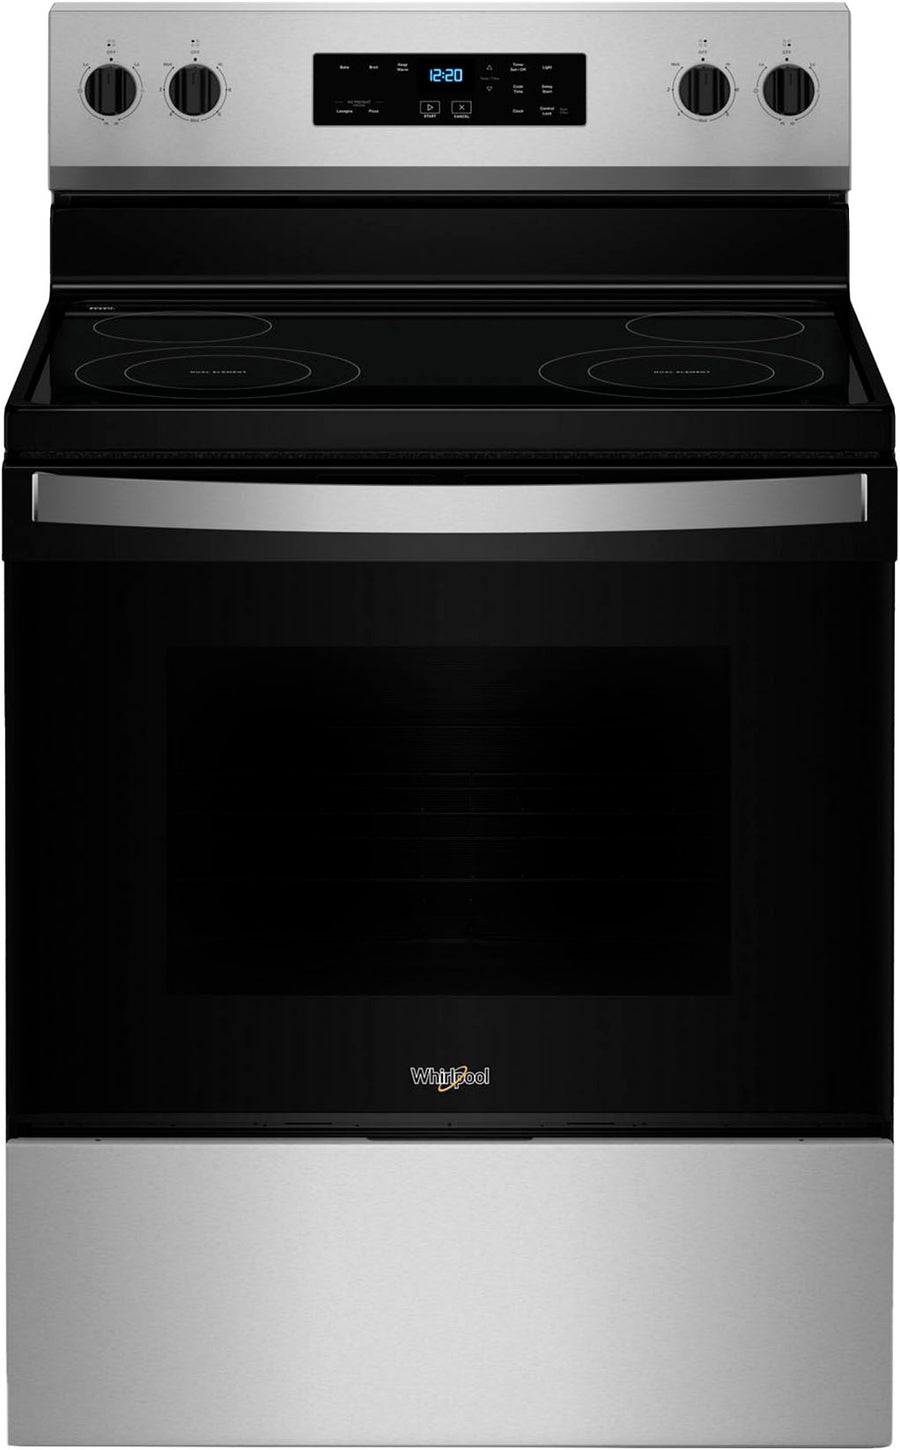 Whirlpool - 5.3 Cu. Ft. Freestanding Electric Range with Cooktop Flexibility - Stainless Steel_0